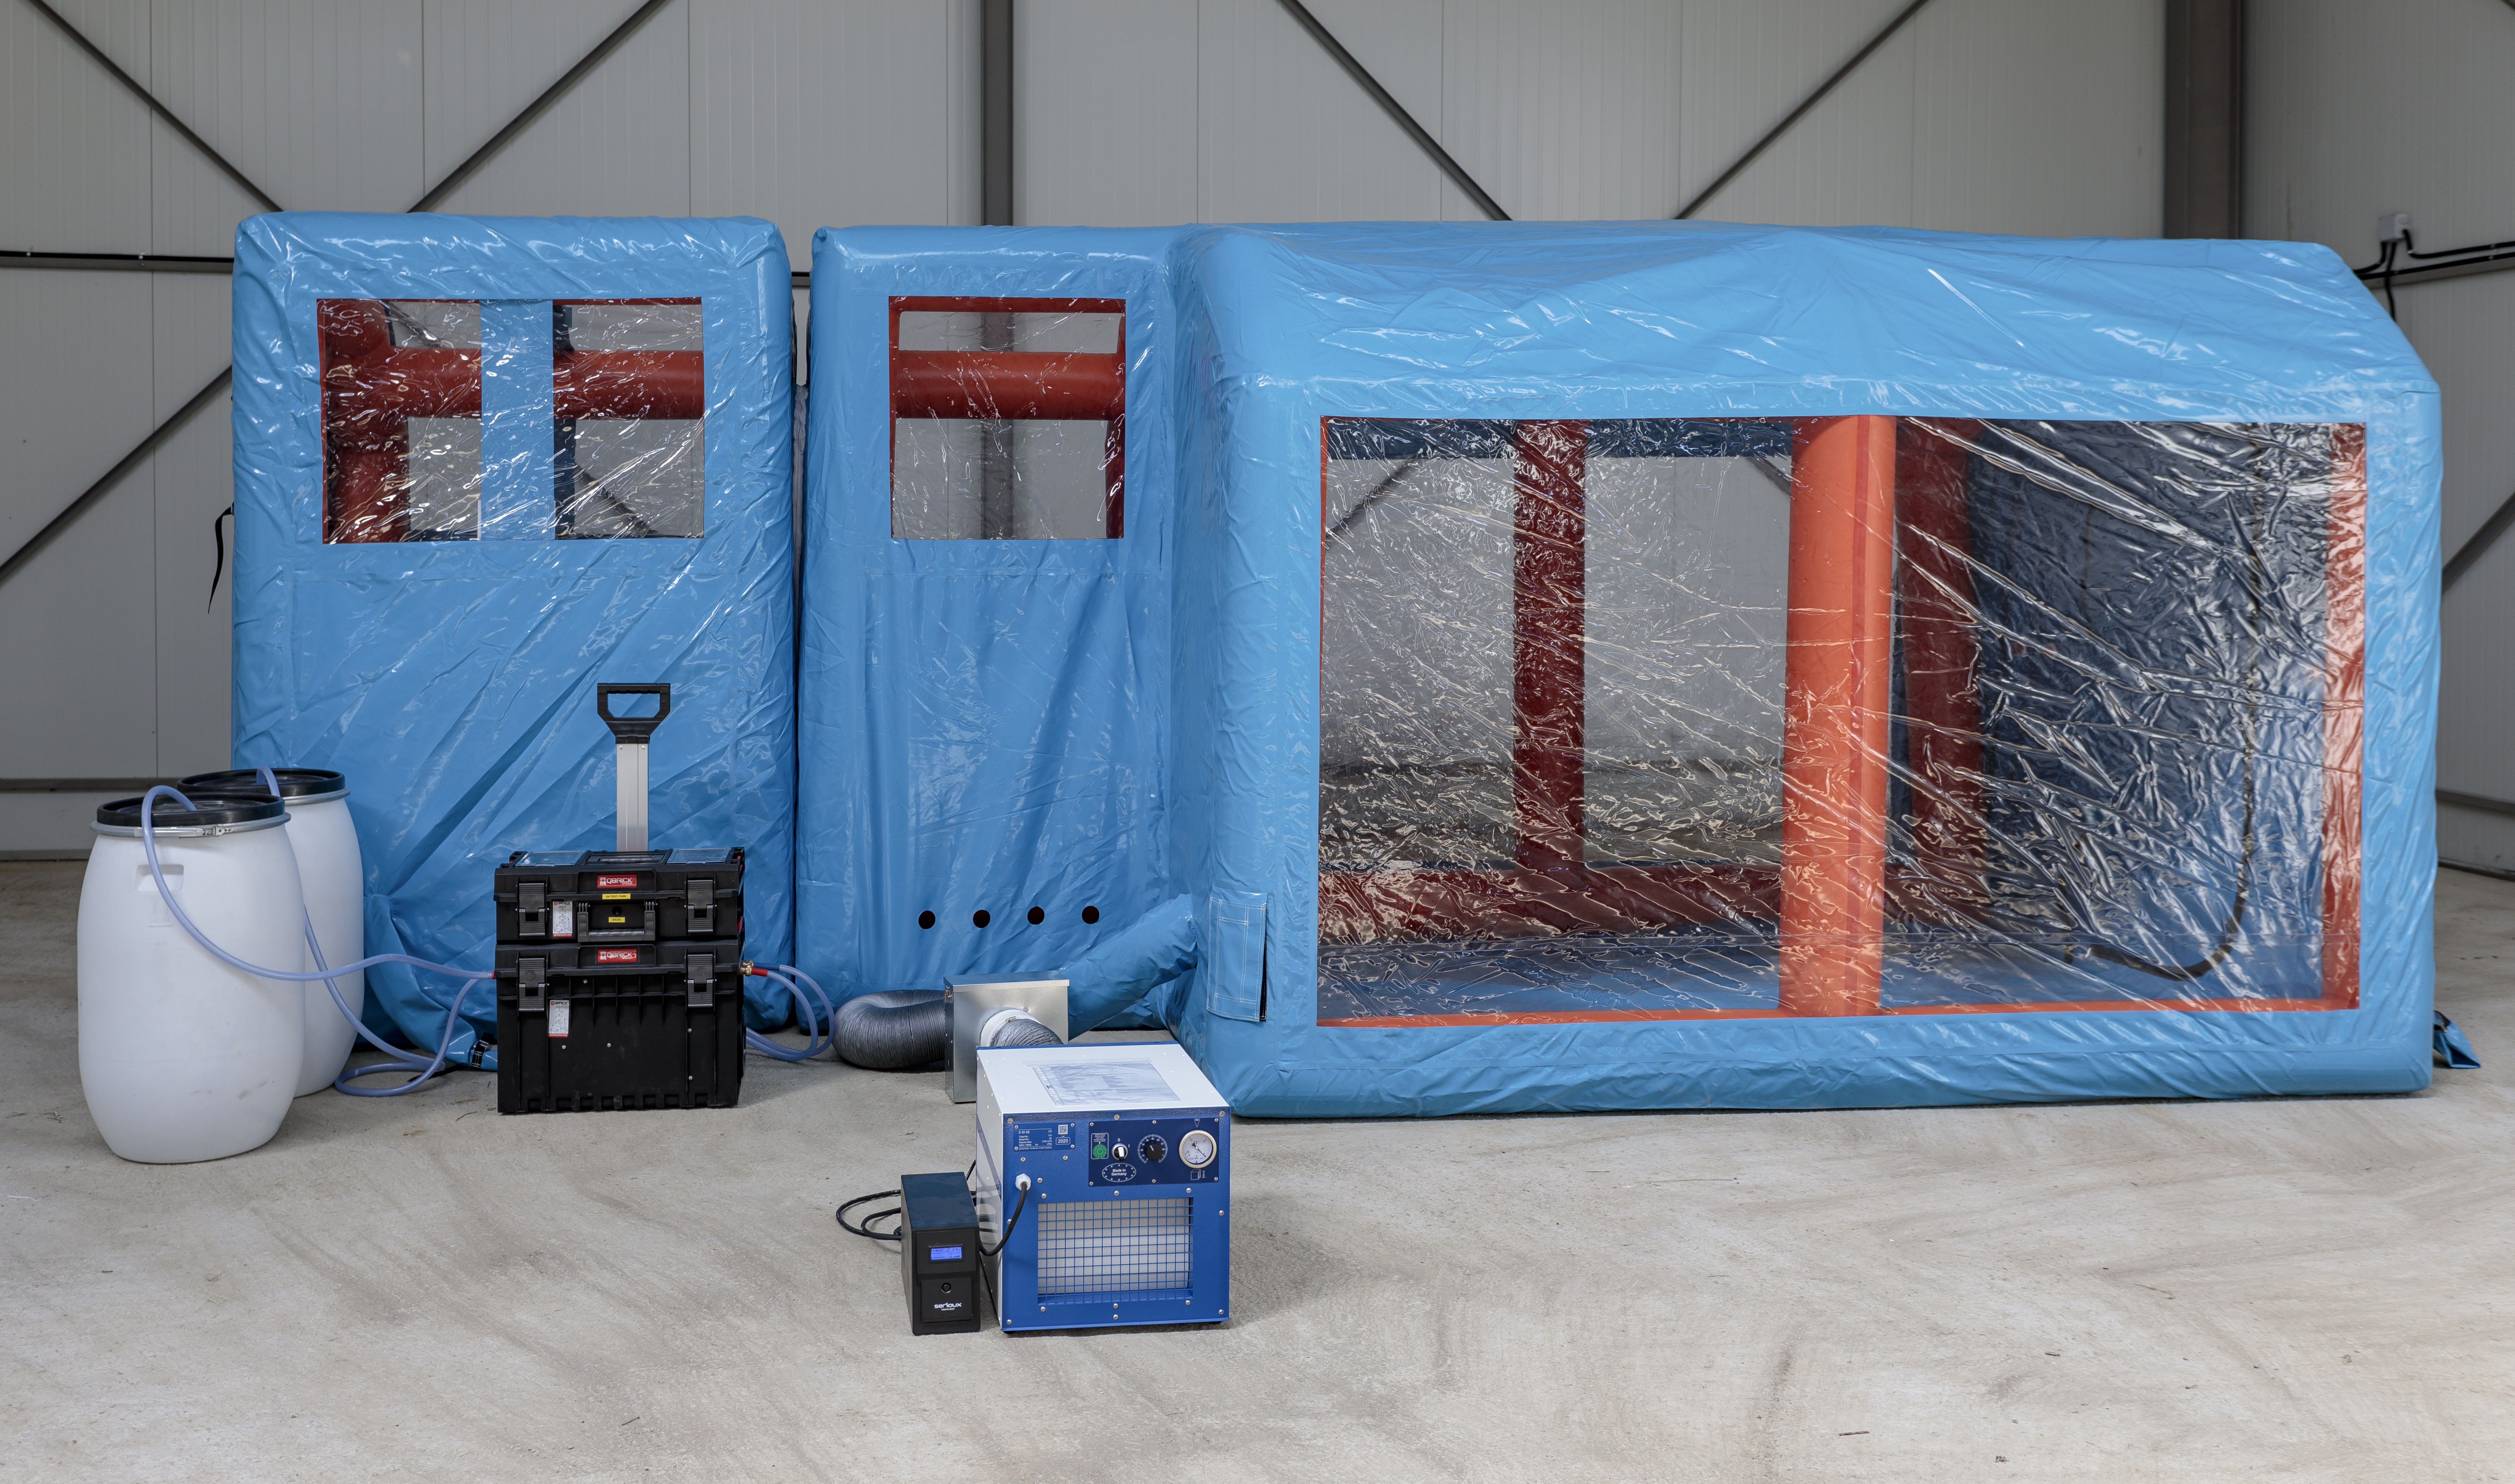 Cleanroom Expert provides inflatable negative pressure isolation rooms